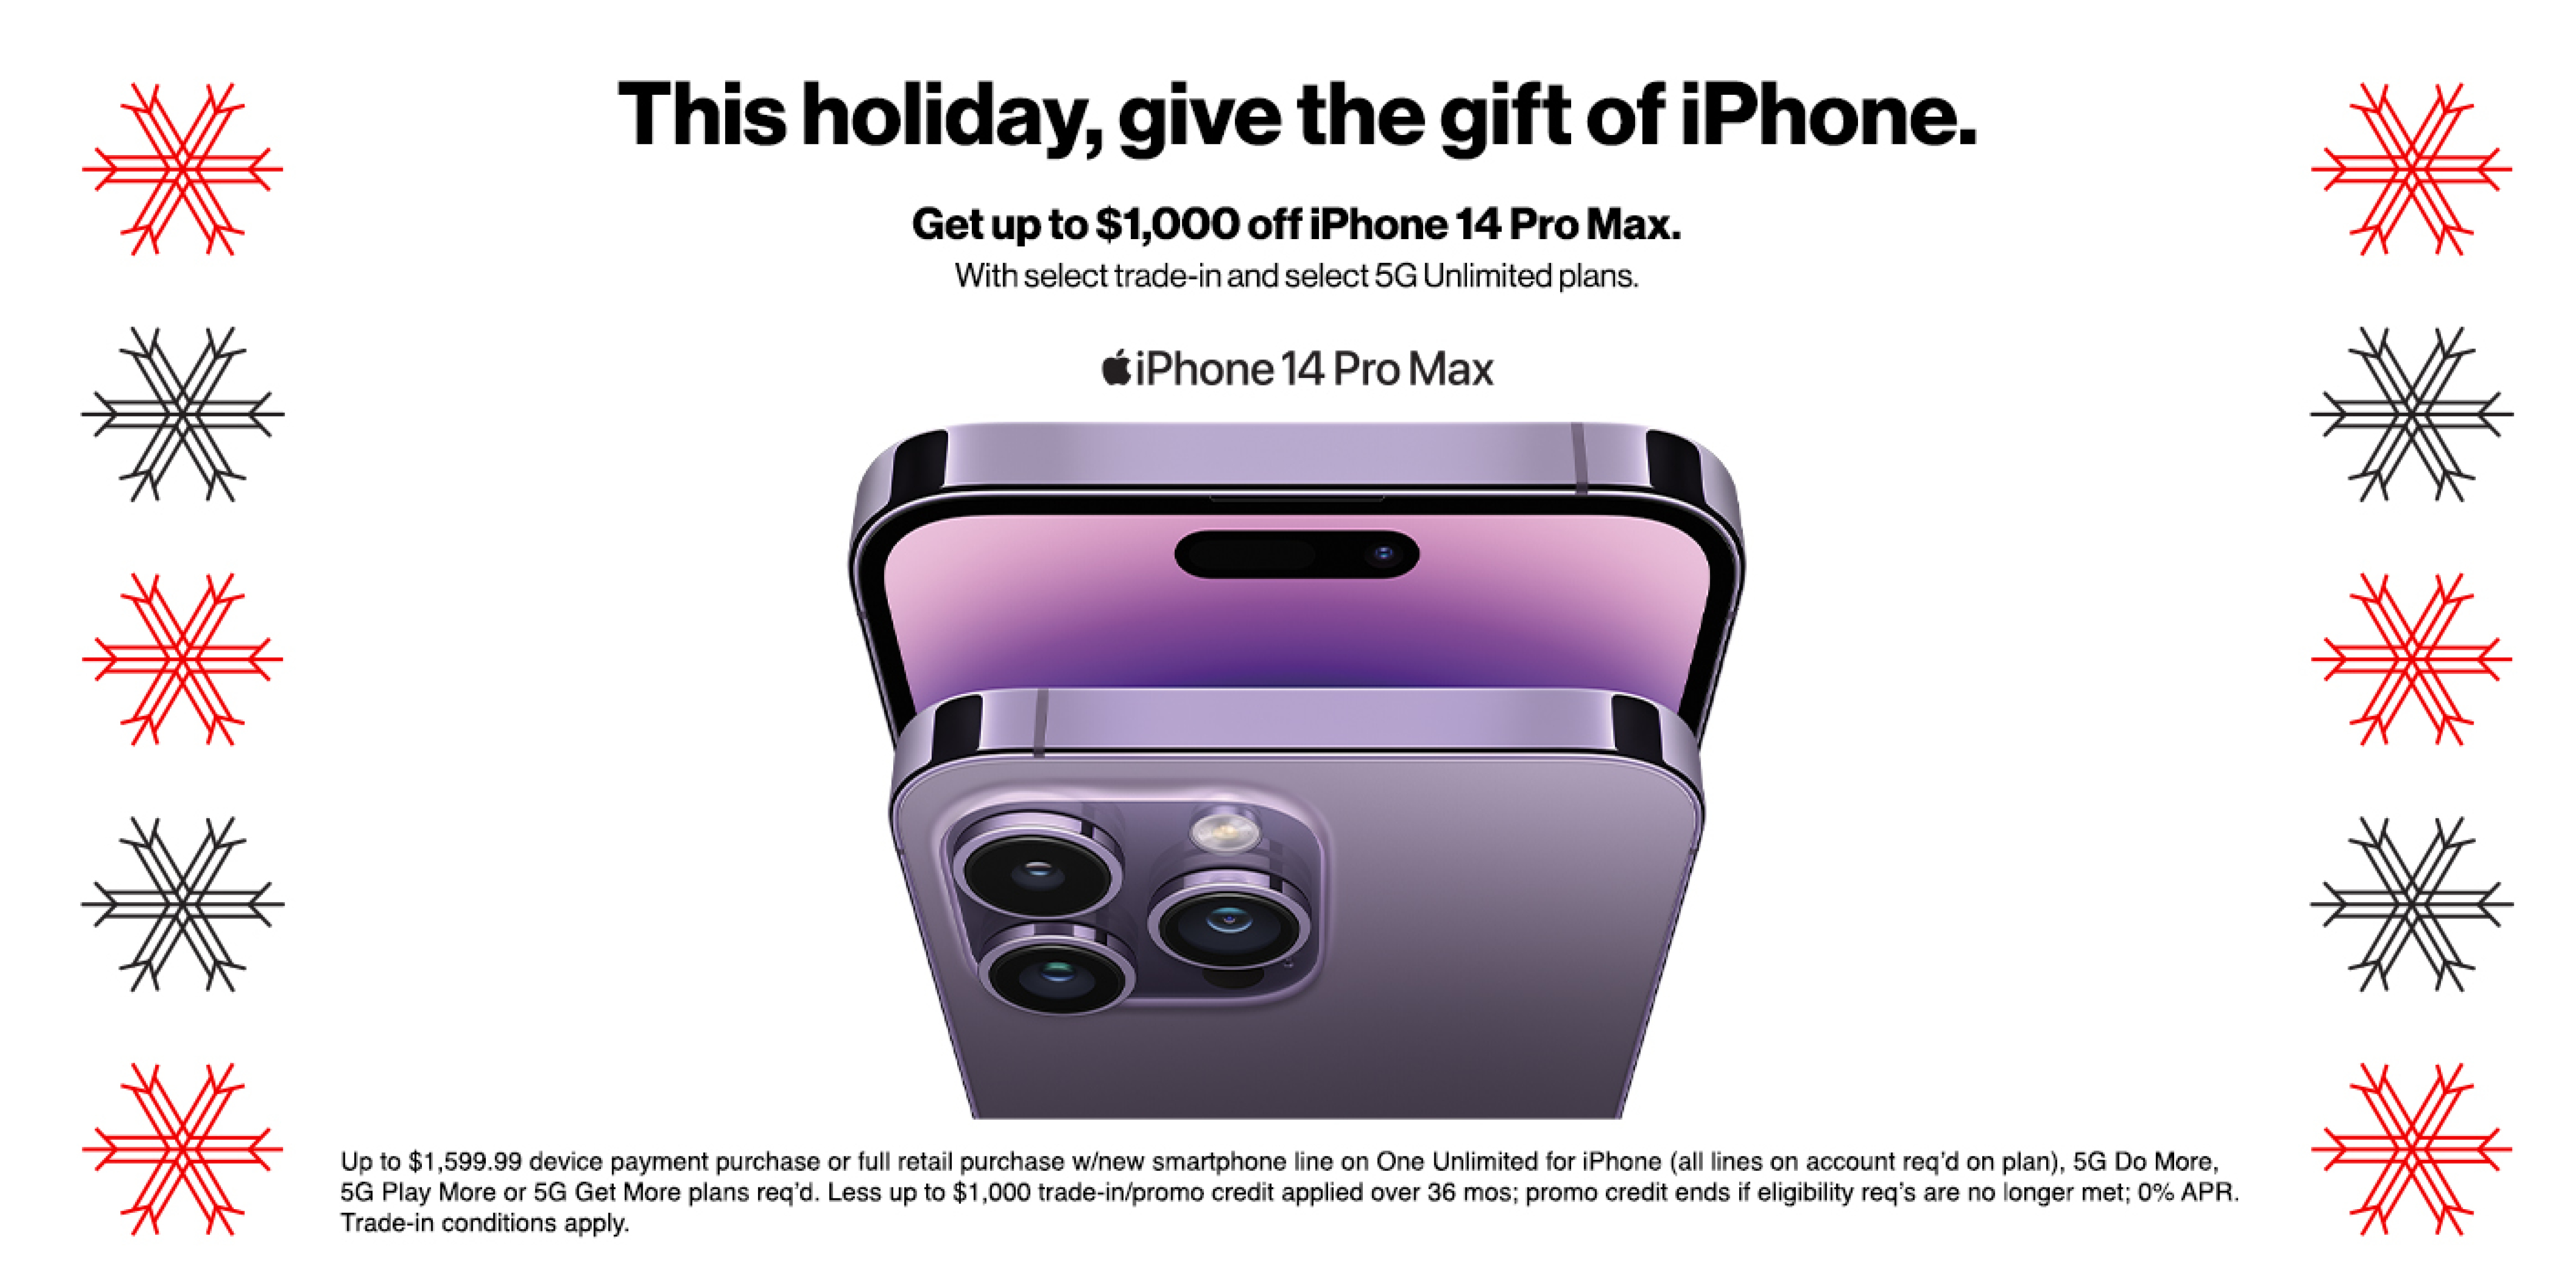 Get up to $1,000 off iPhone 14 Pro Max w/trade-in on select unlimited plan.